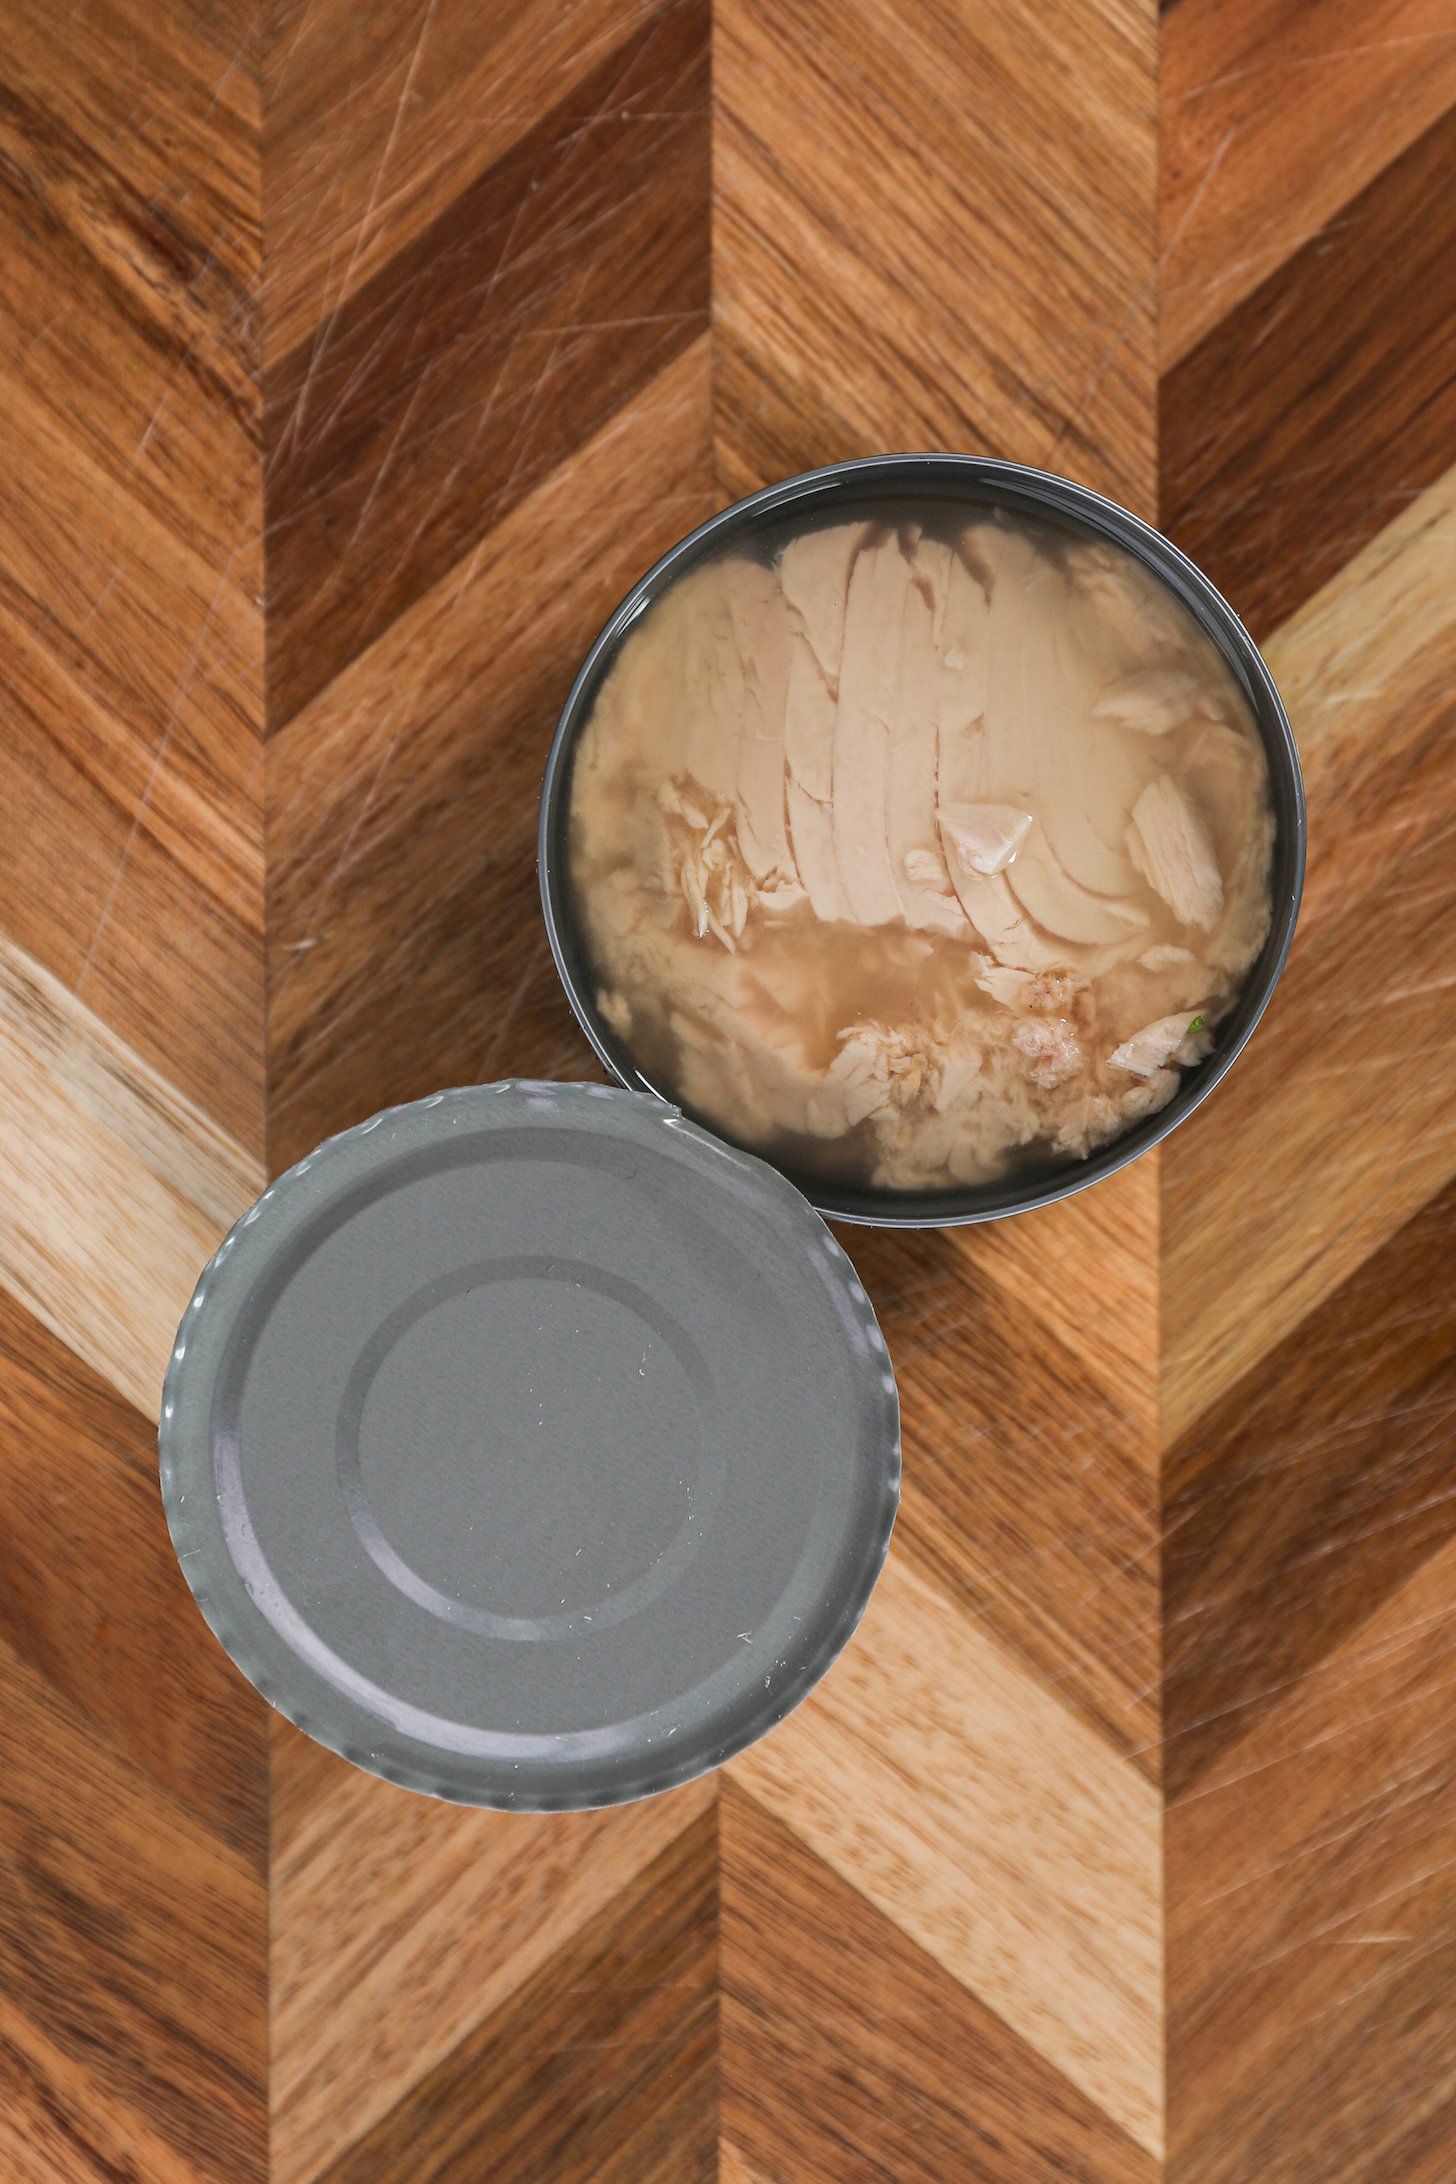 An open can of tuna submerged in liquid.